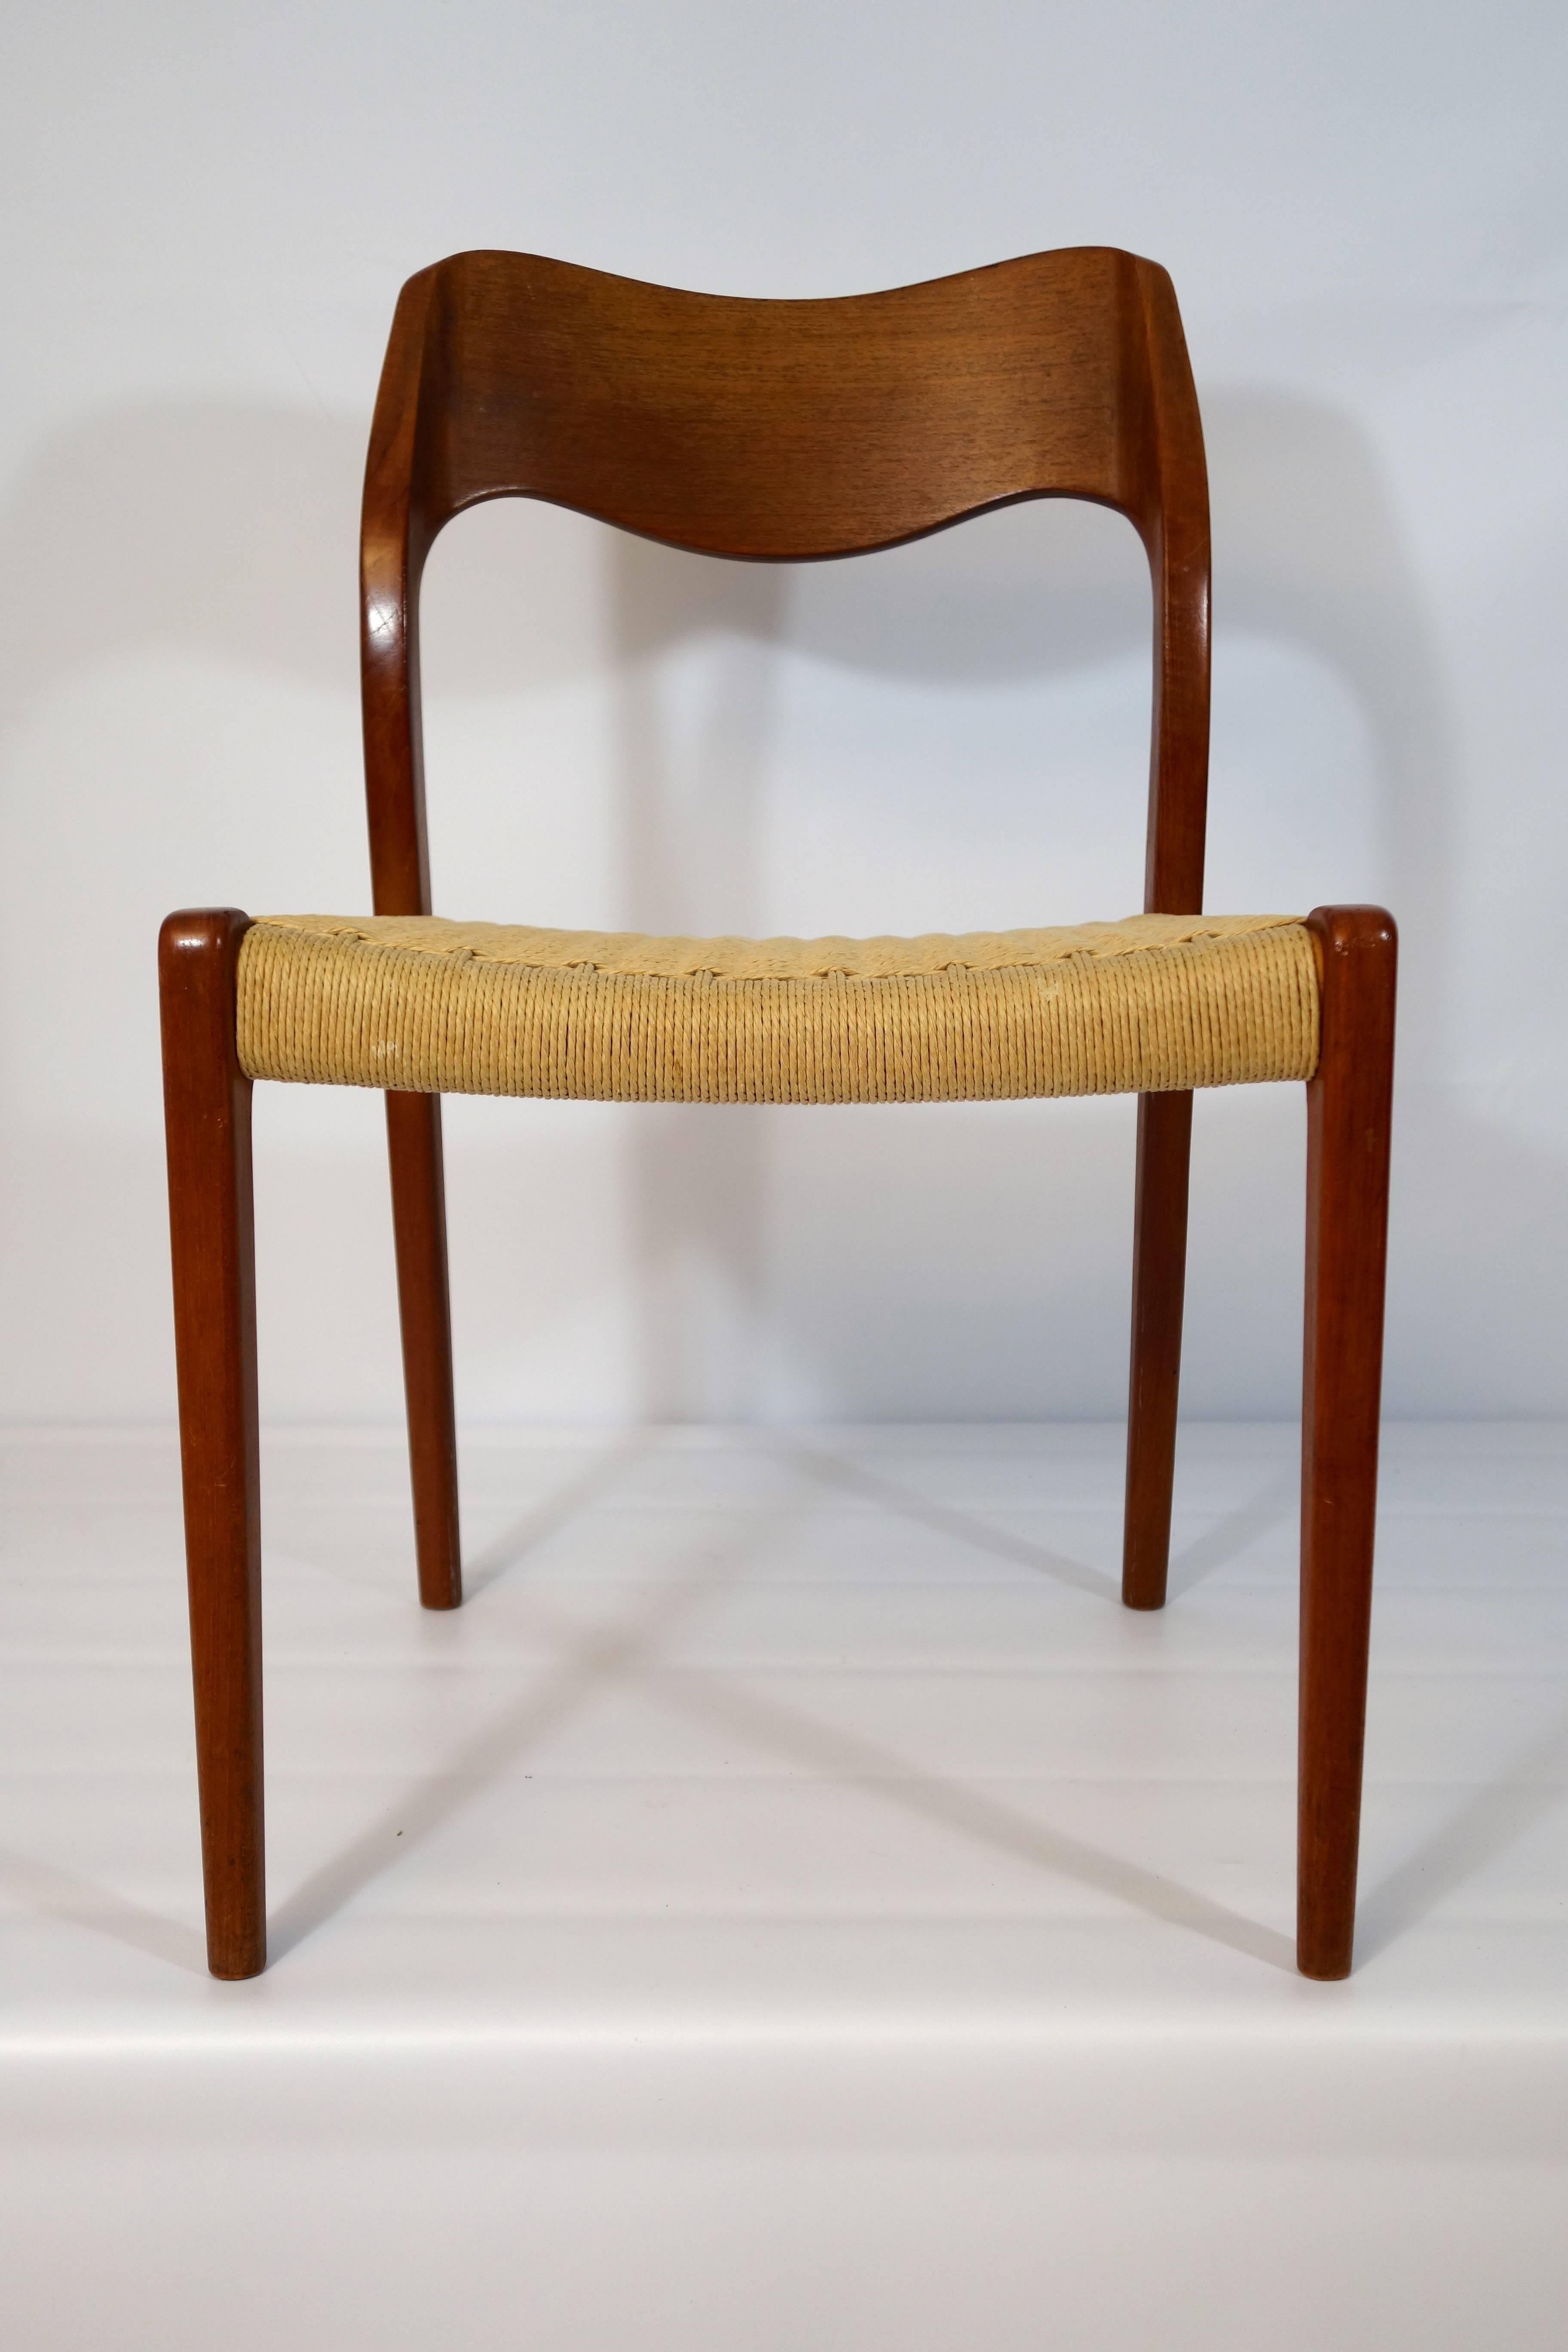 Set of four teak dining chairs '71' designed by Niels O. Moller for J.L. Mobelfabrik, with the original woven paper cord seats.
The curvature of the back rests in two directions (both backwards as on the lower side of them) is what distinguishes the